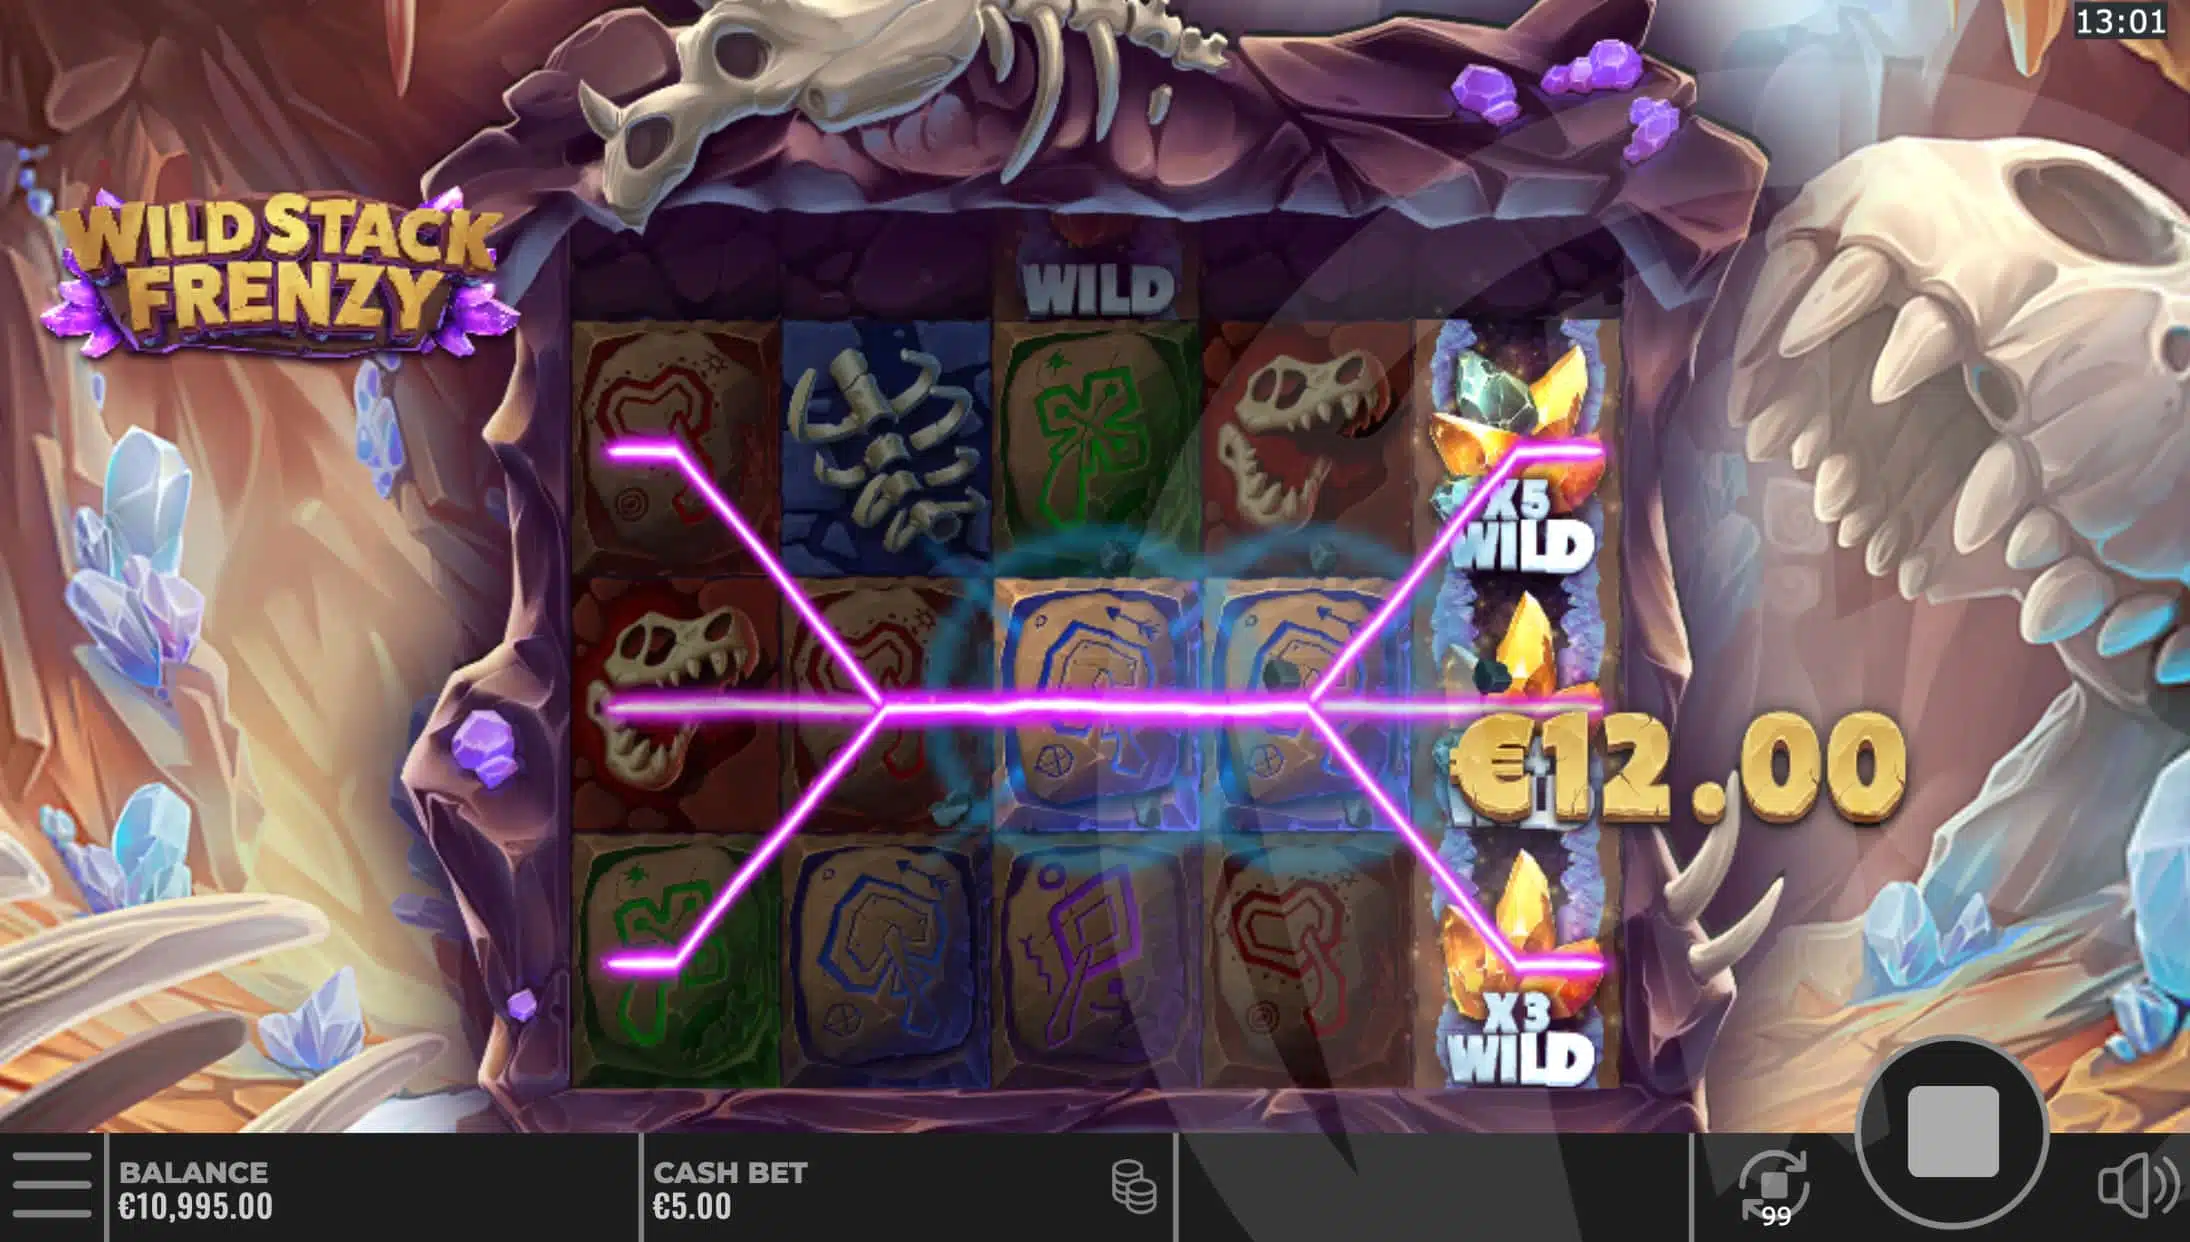 Wild Stack Frenzy Offers Players 20 Fixed Win Lines That Pay Both Ways